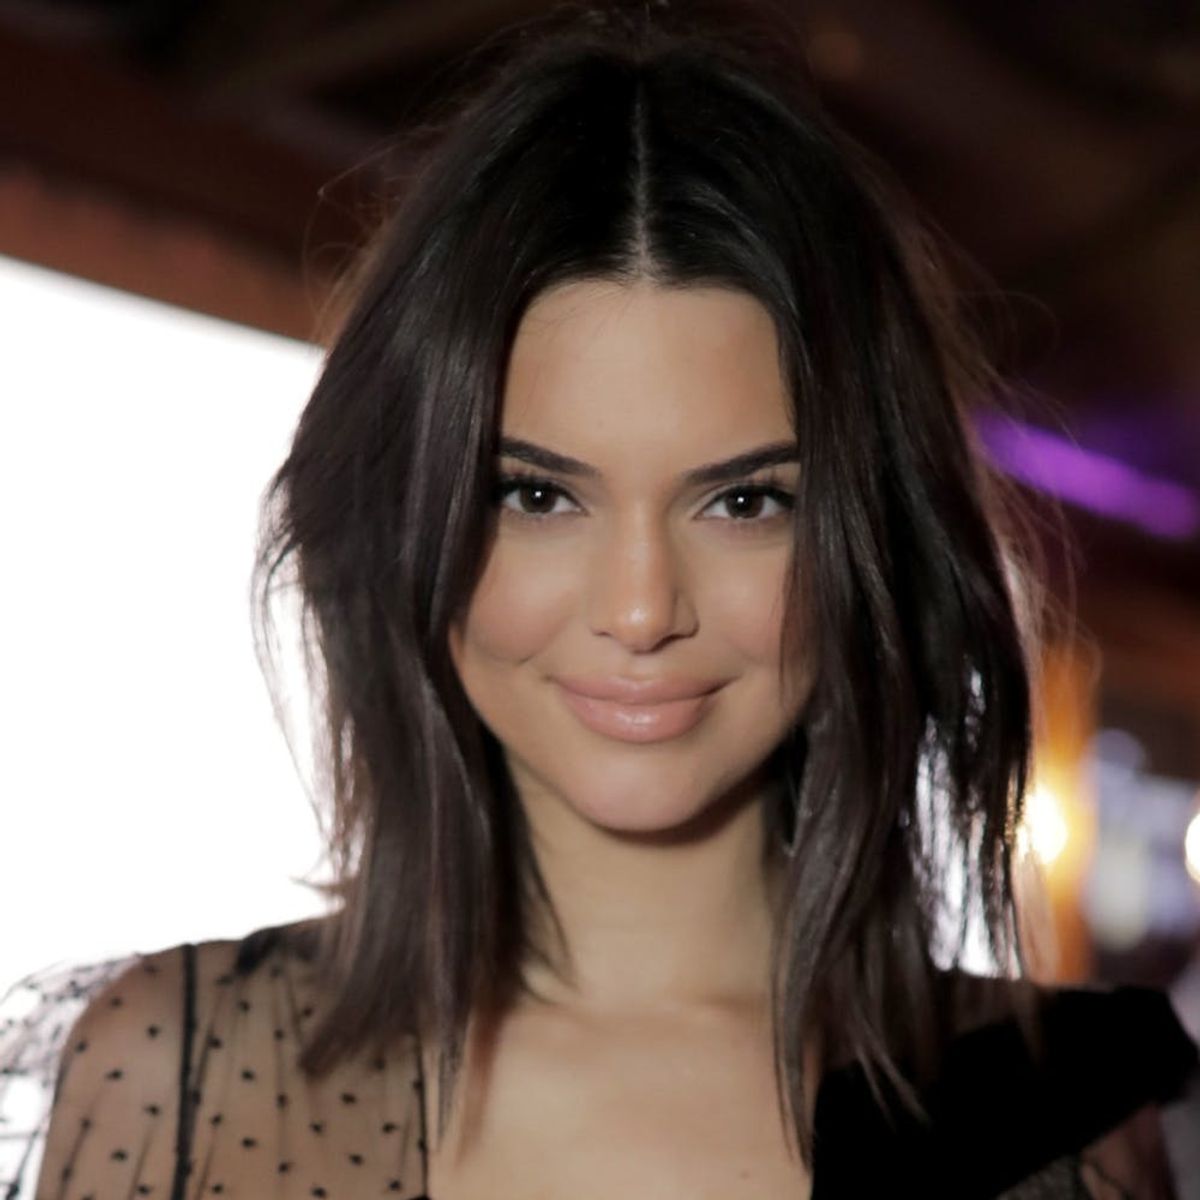 Kendall Jenner Reveals She’s Never Done THIS Major Beauty Treatment